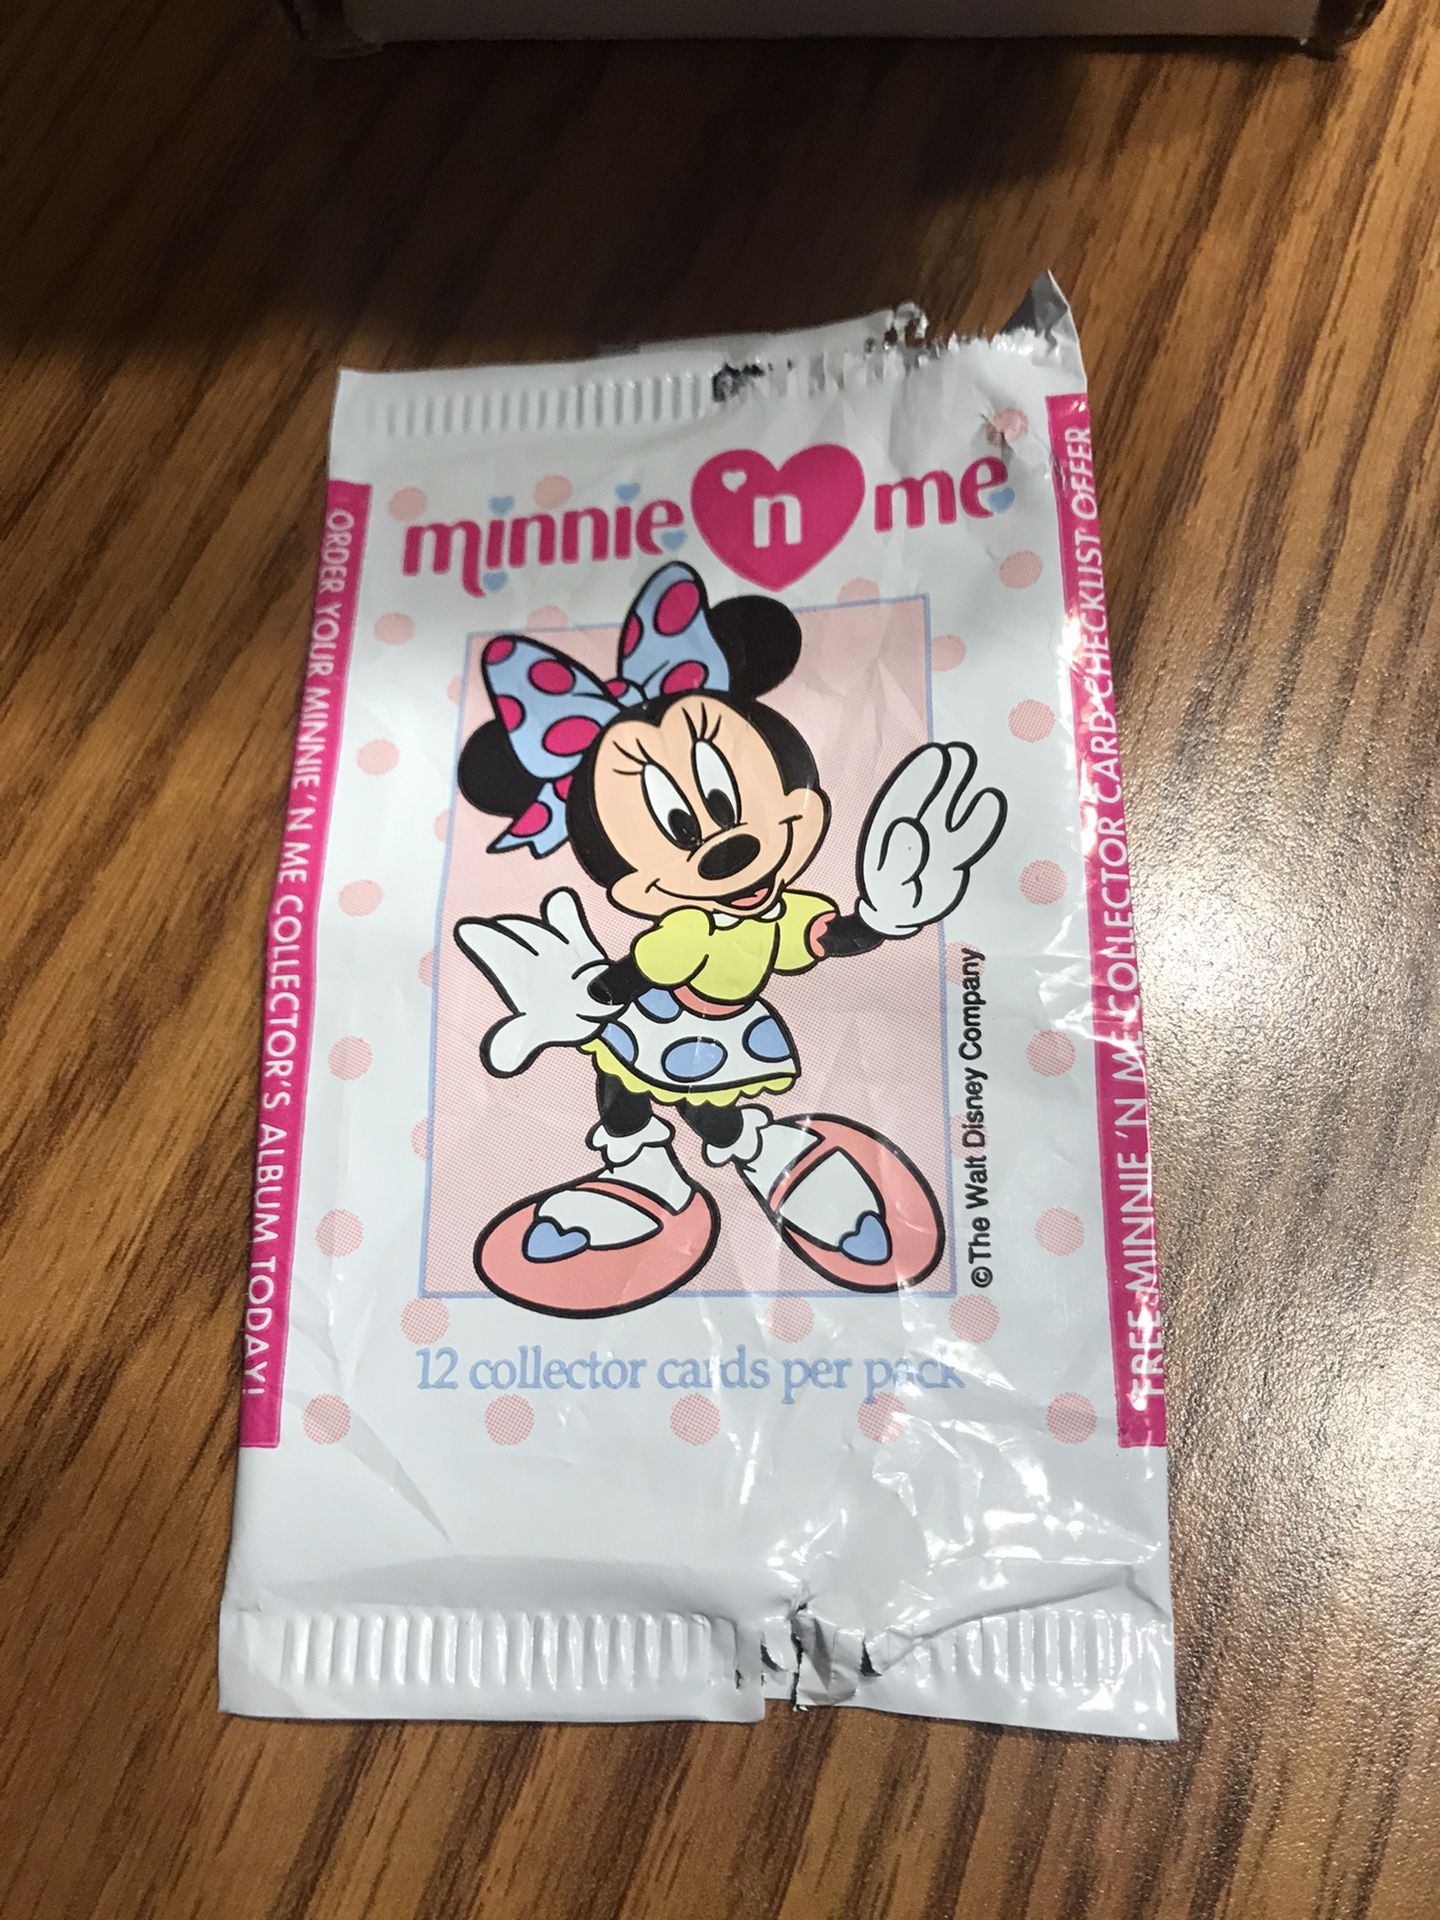 Disney 1991 impel minnie and me card set(158) cards